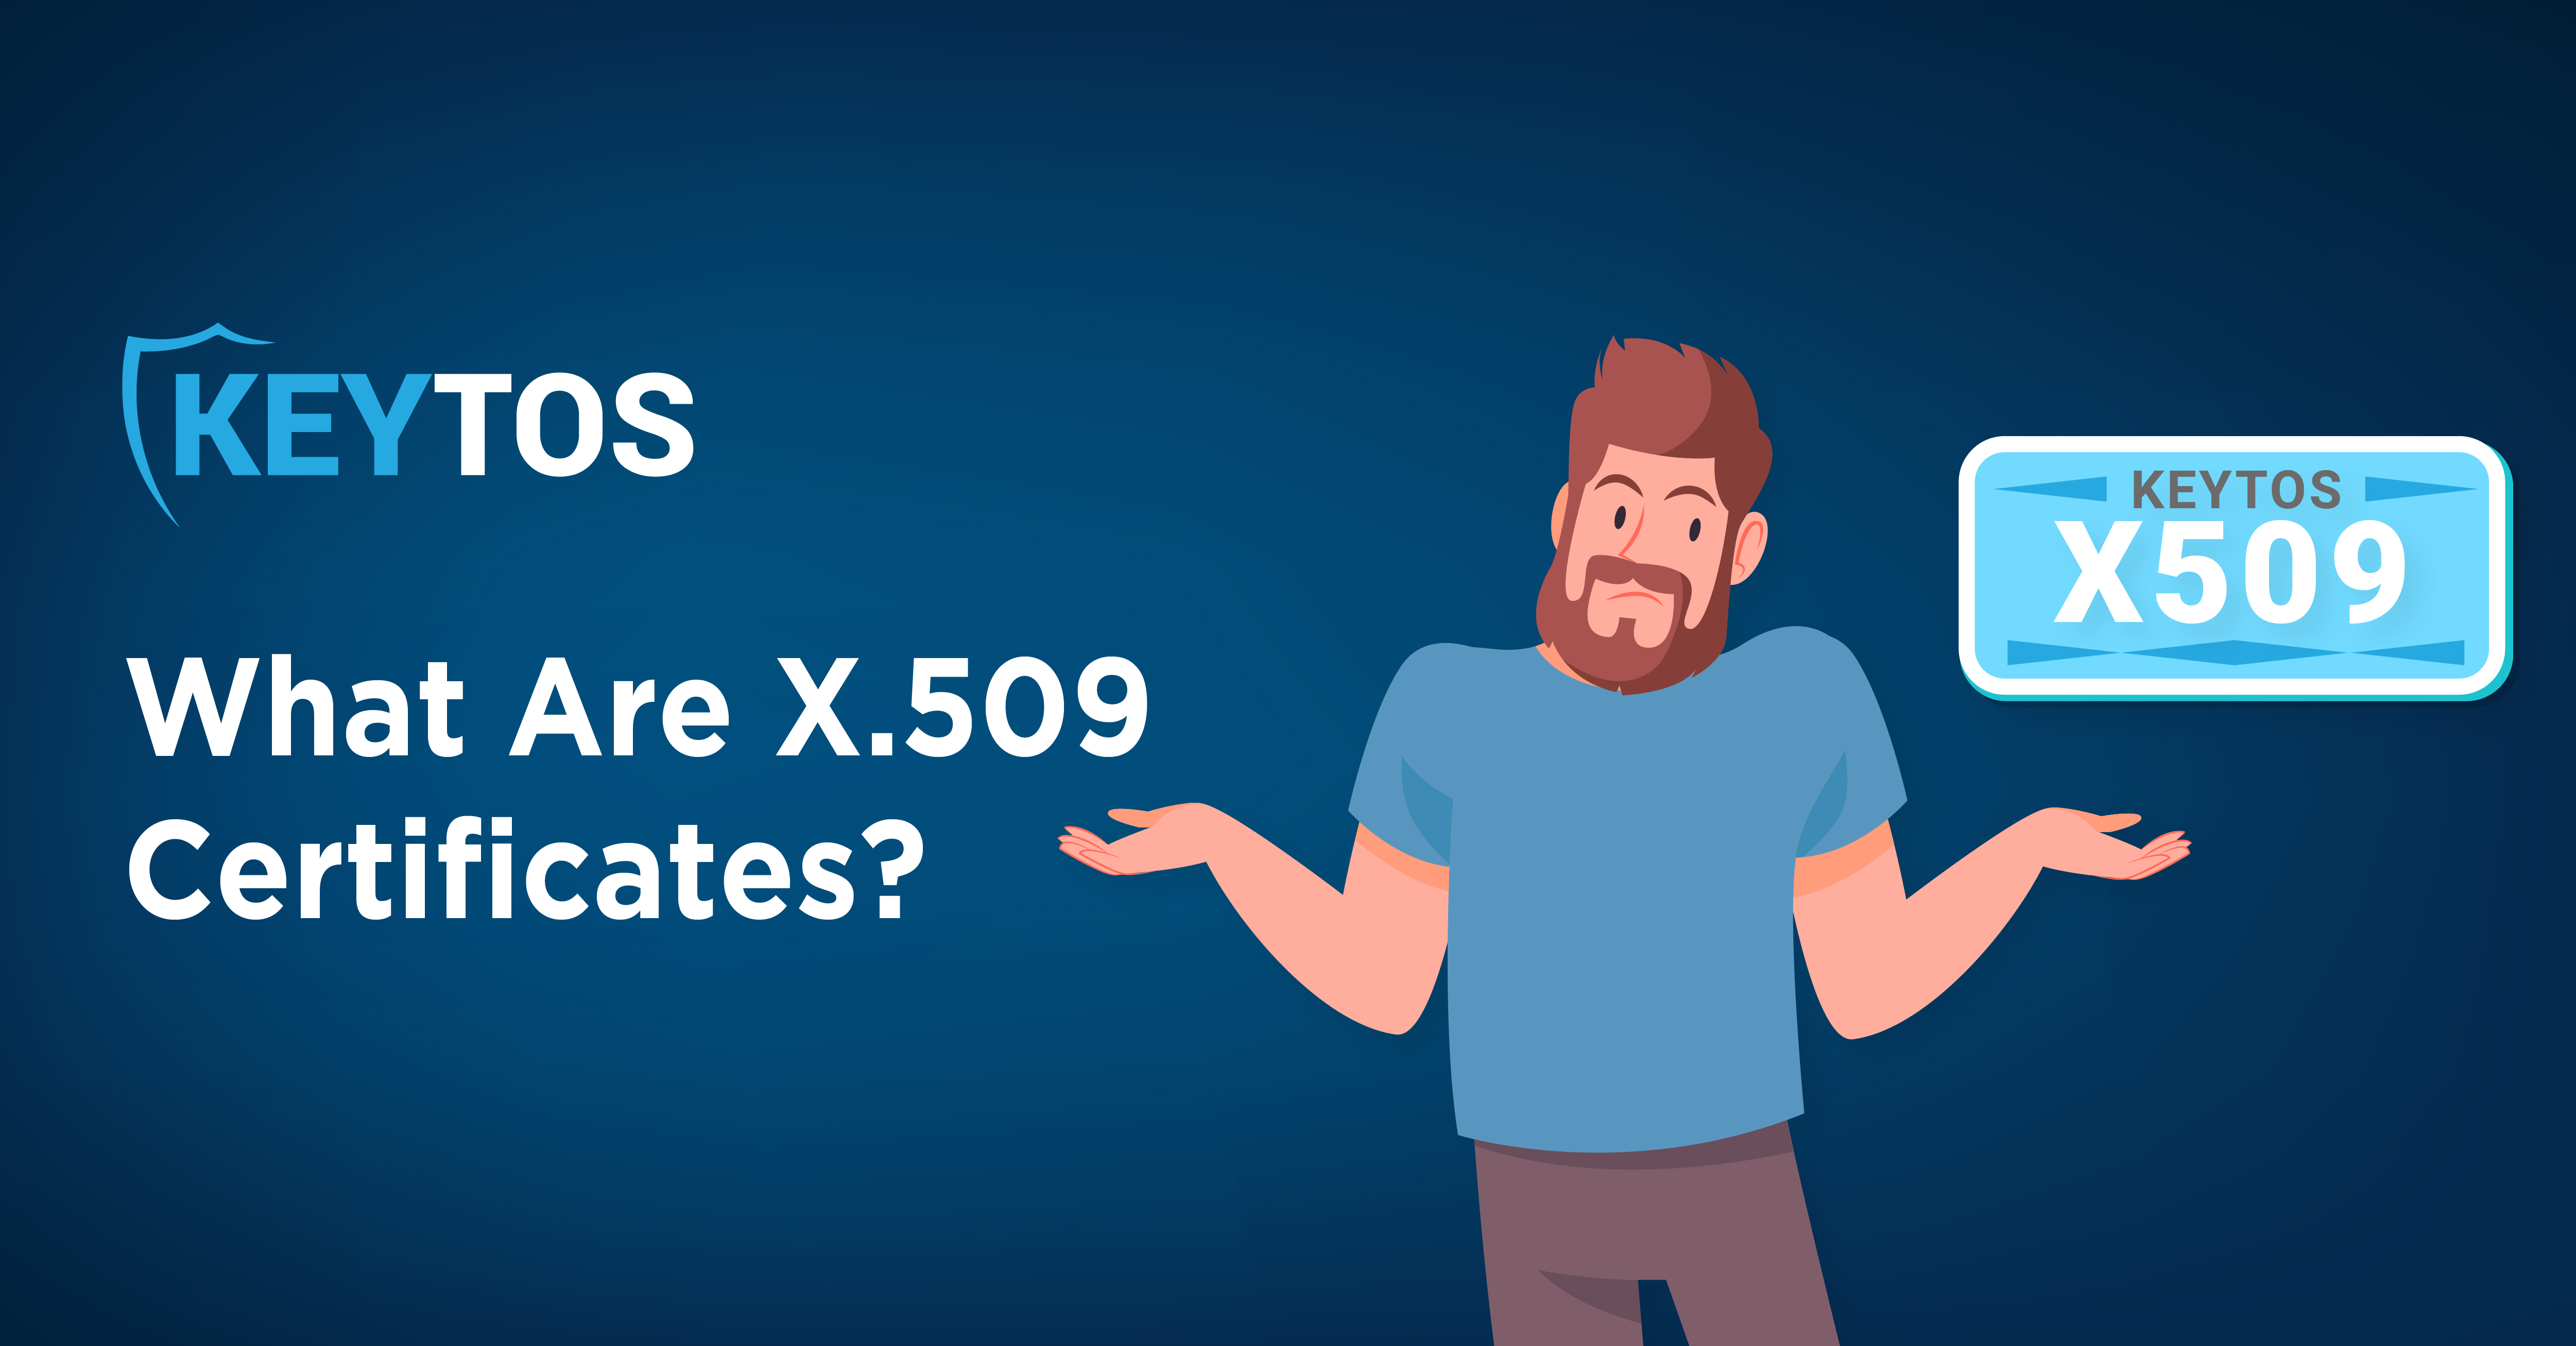 What Are X.509 Certificates?